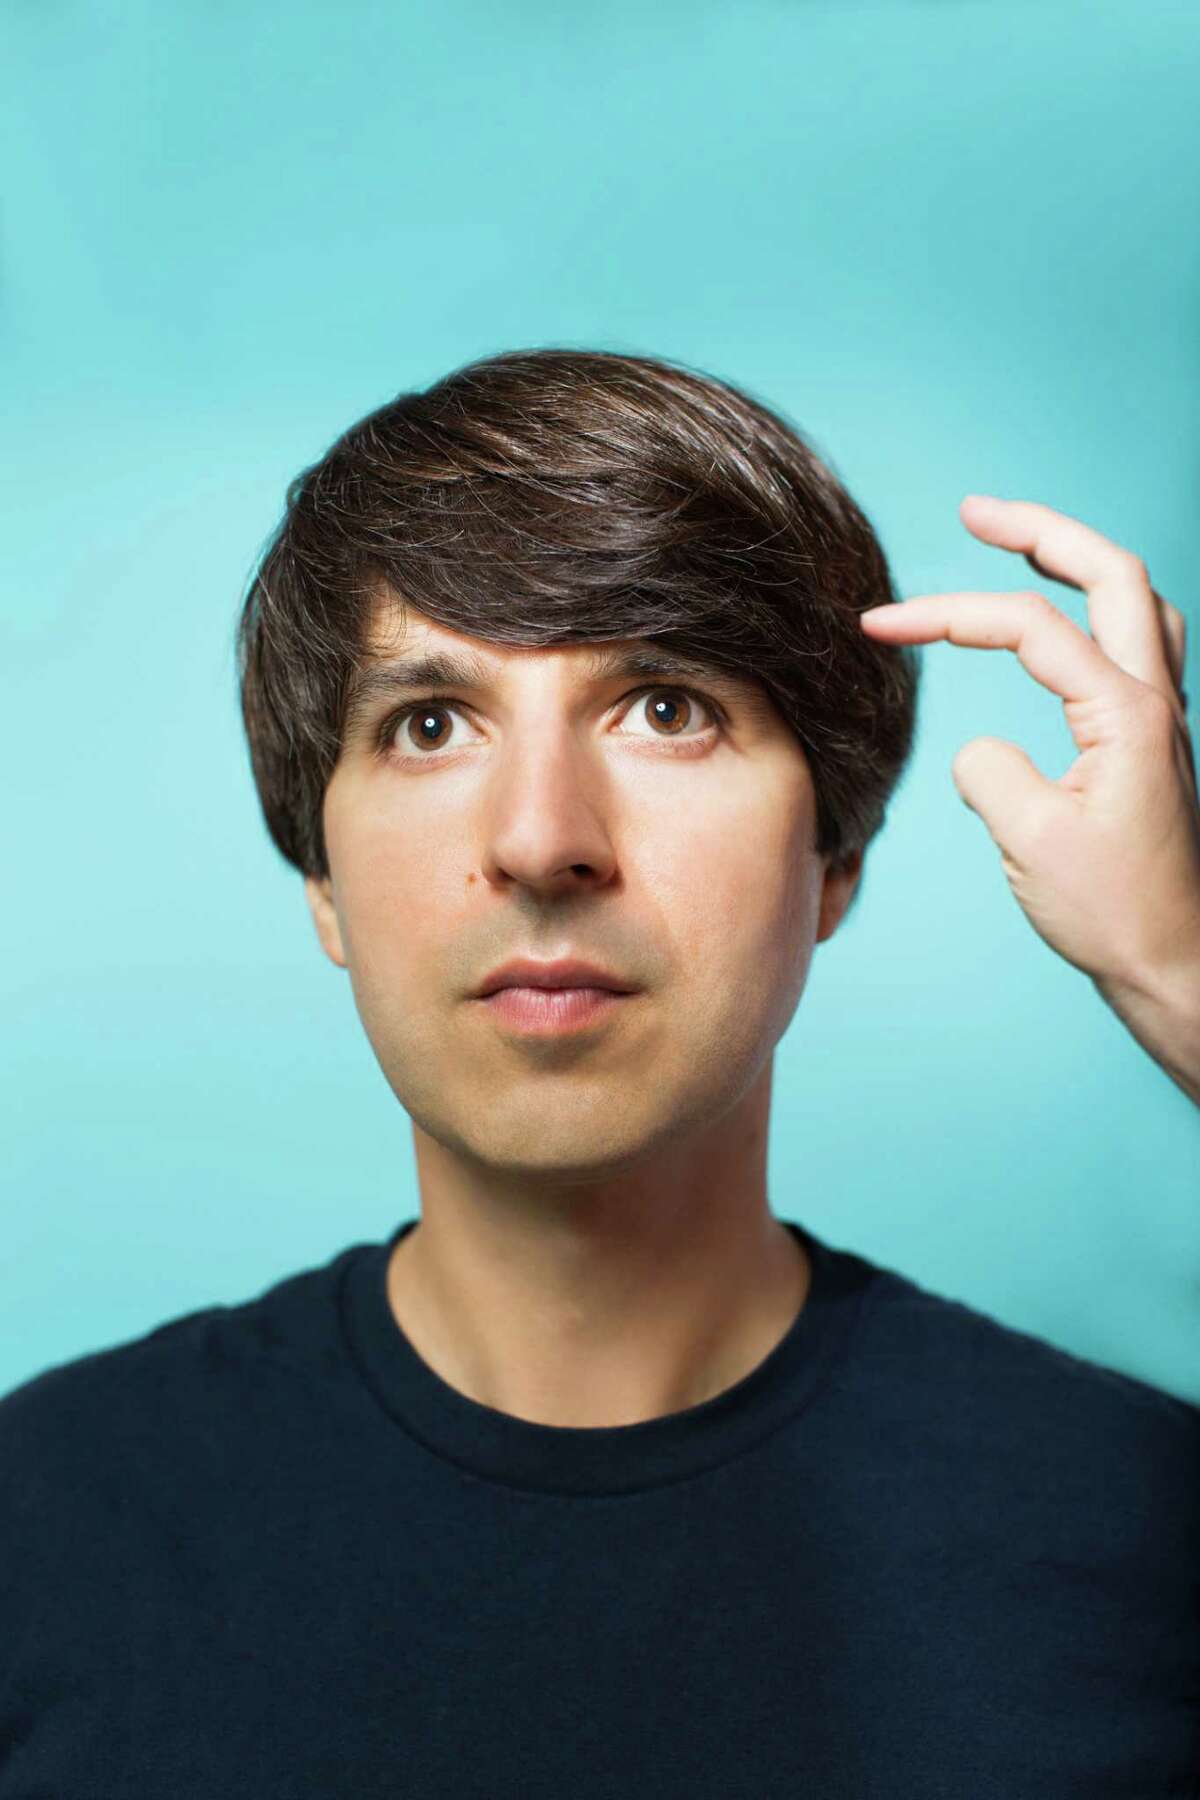 Demetri Martin performs at Stamford's Palace Theatre on Thursday, May 15.